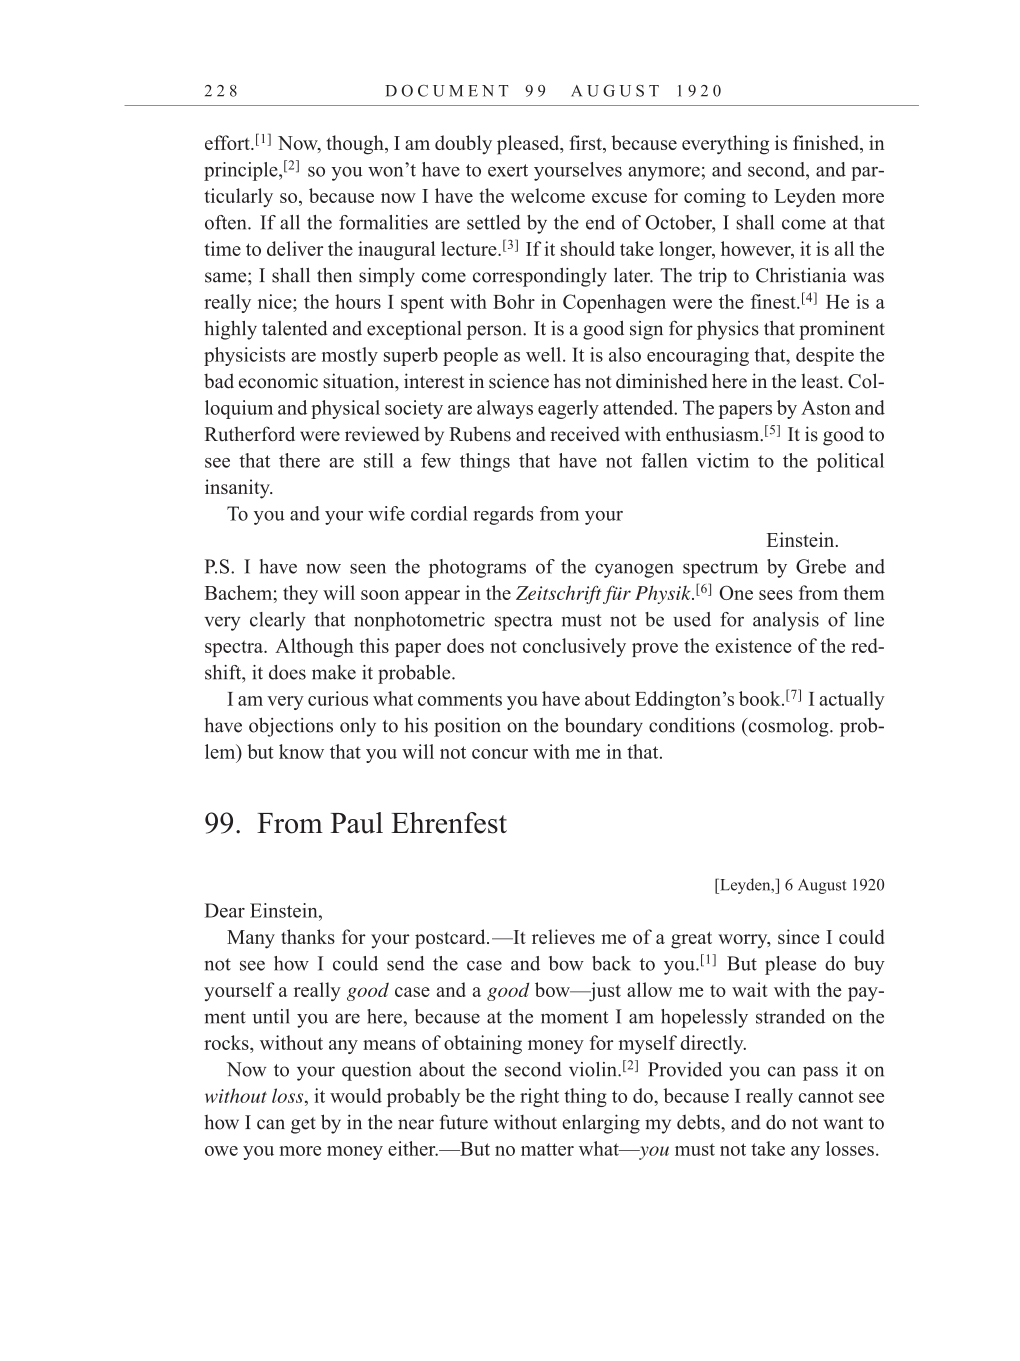 Volume 10: The Berlin Years: Correspondence, May-December 1920, and Supplementary Correspondence, 1909-1920 (English translation supplement) page 228